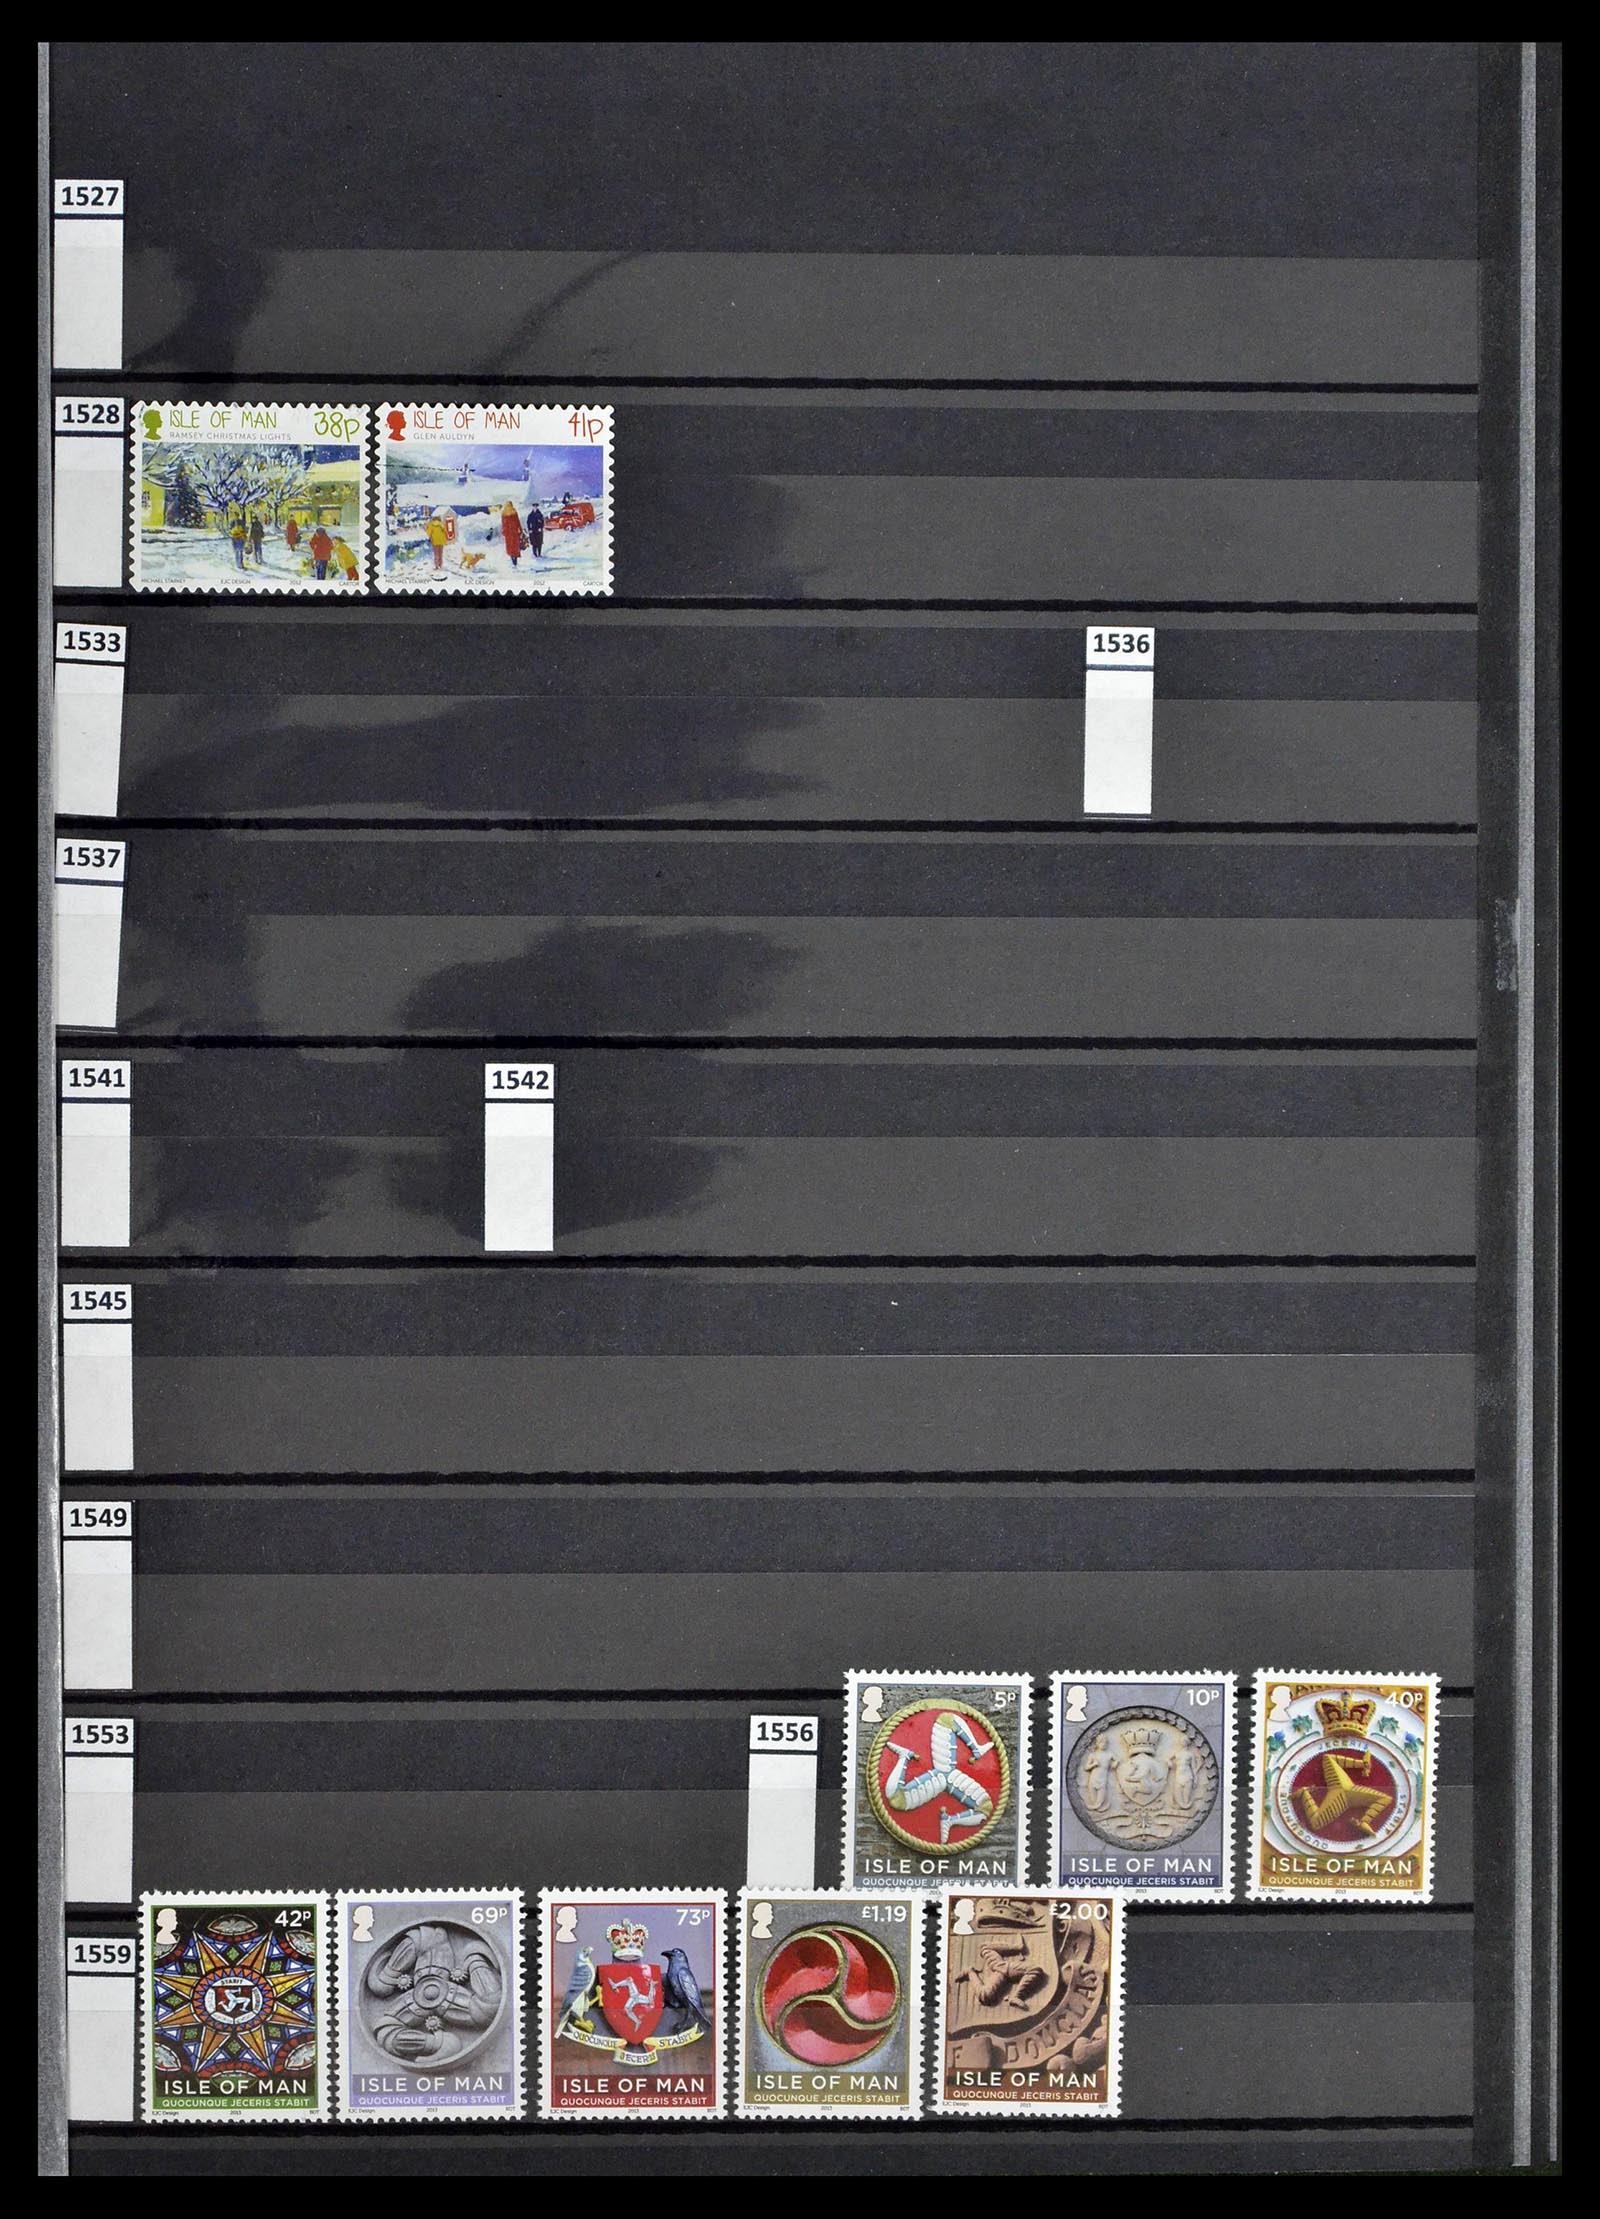 39197 0152 - Stamp collection 39197 Channel Islands 1941-2015.